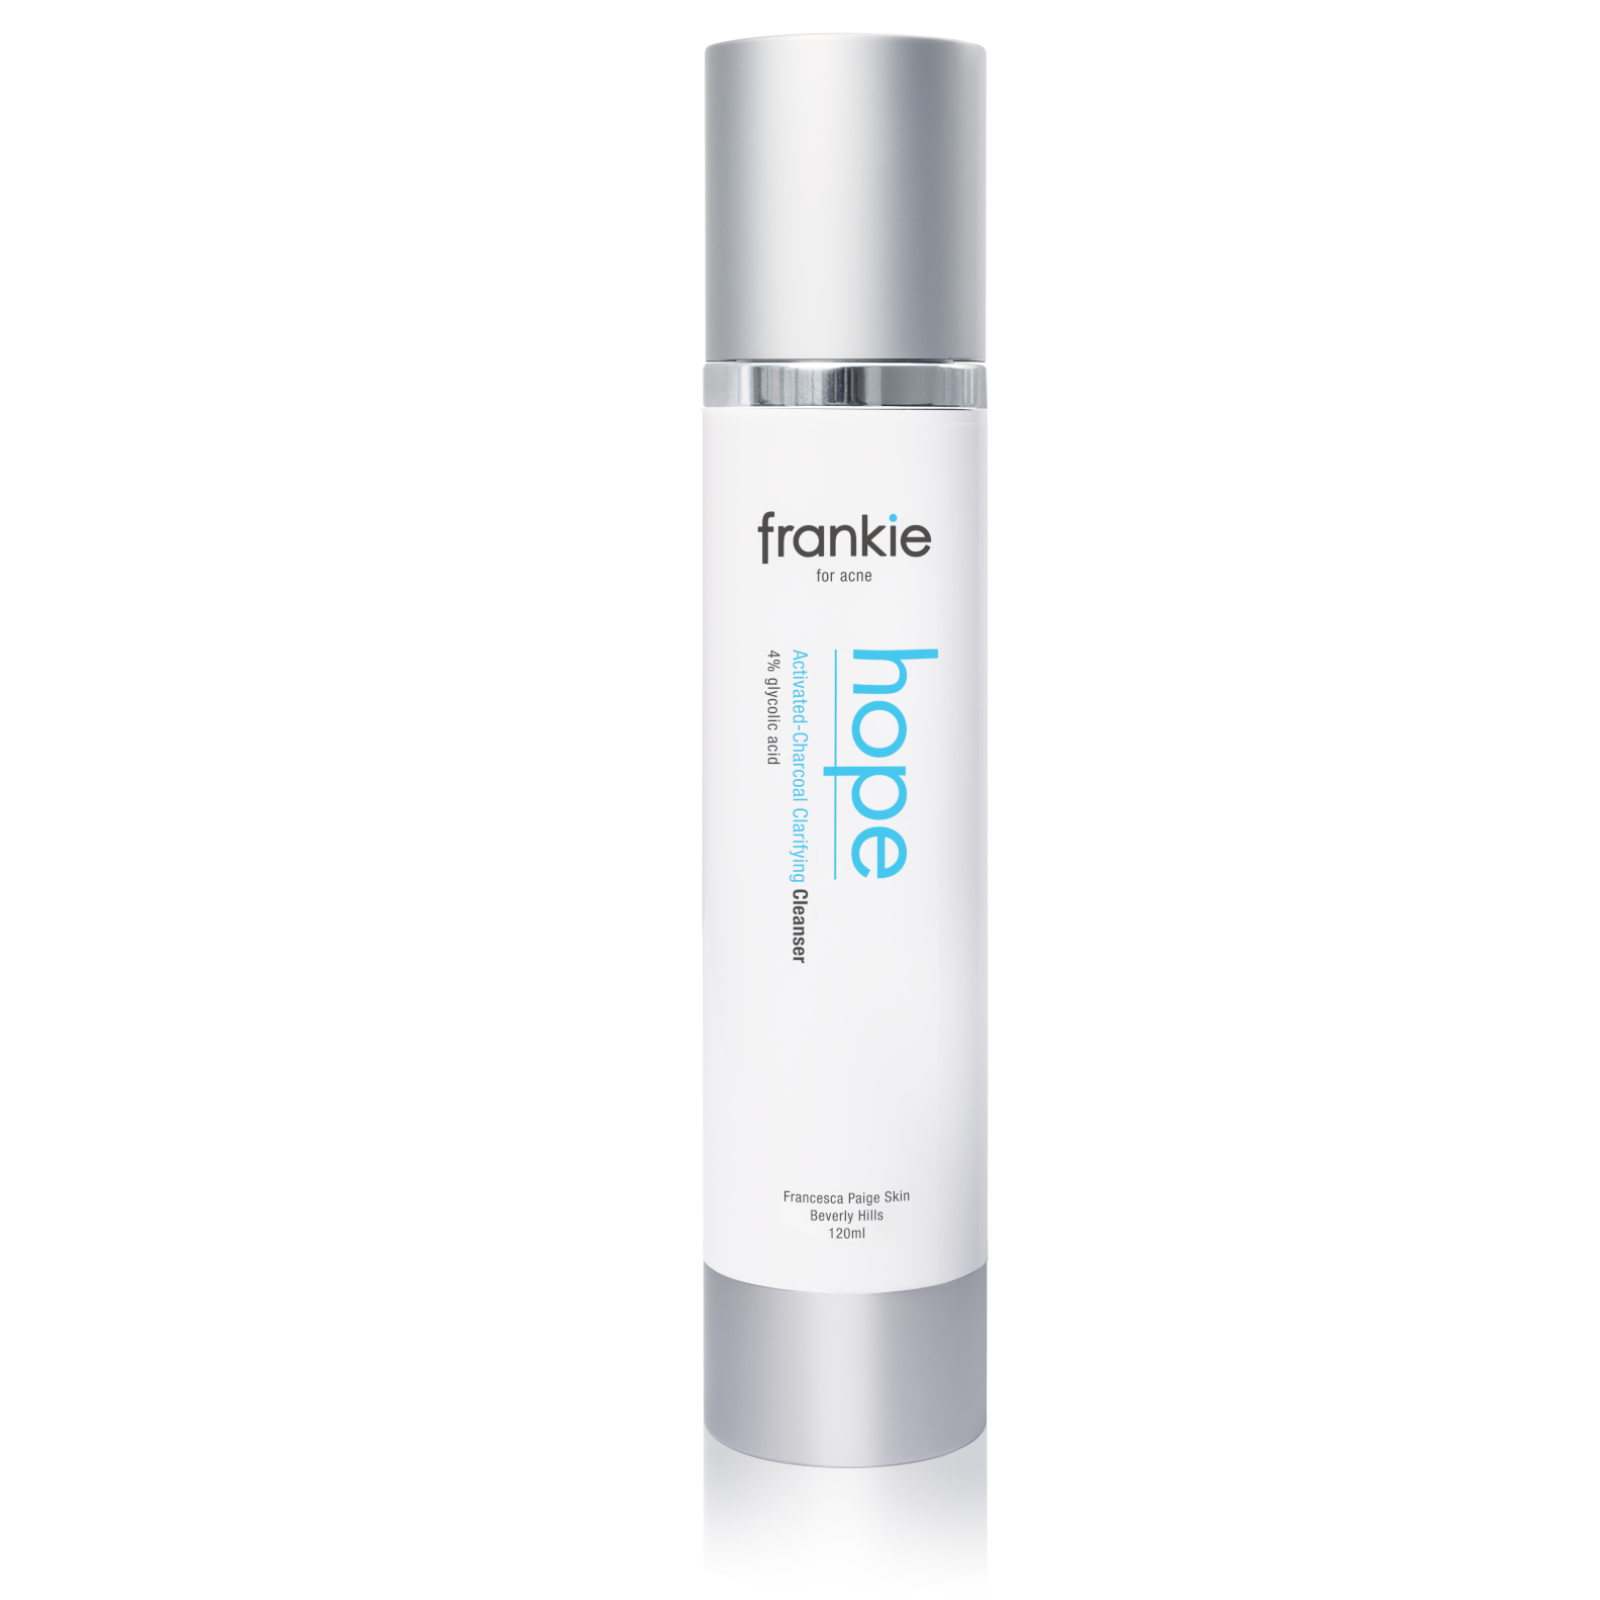 Frankie for acne hope face wash for oily skin by FP Skin a sulfate free cleanser with hyaluronic acid, glycolic acid, and activated charcoal